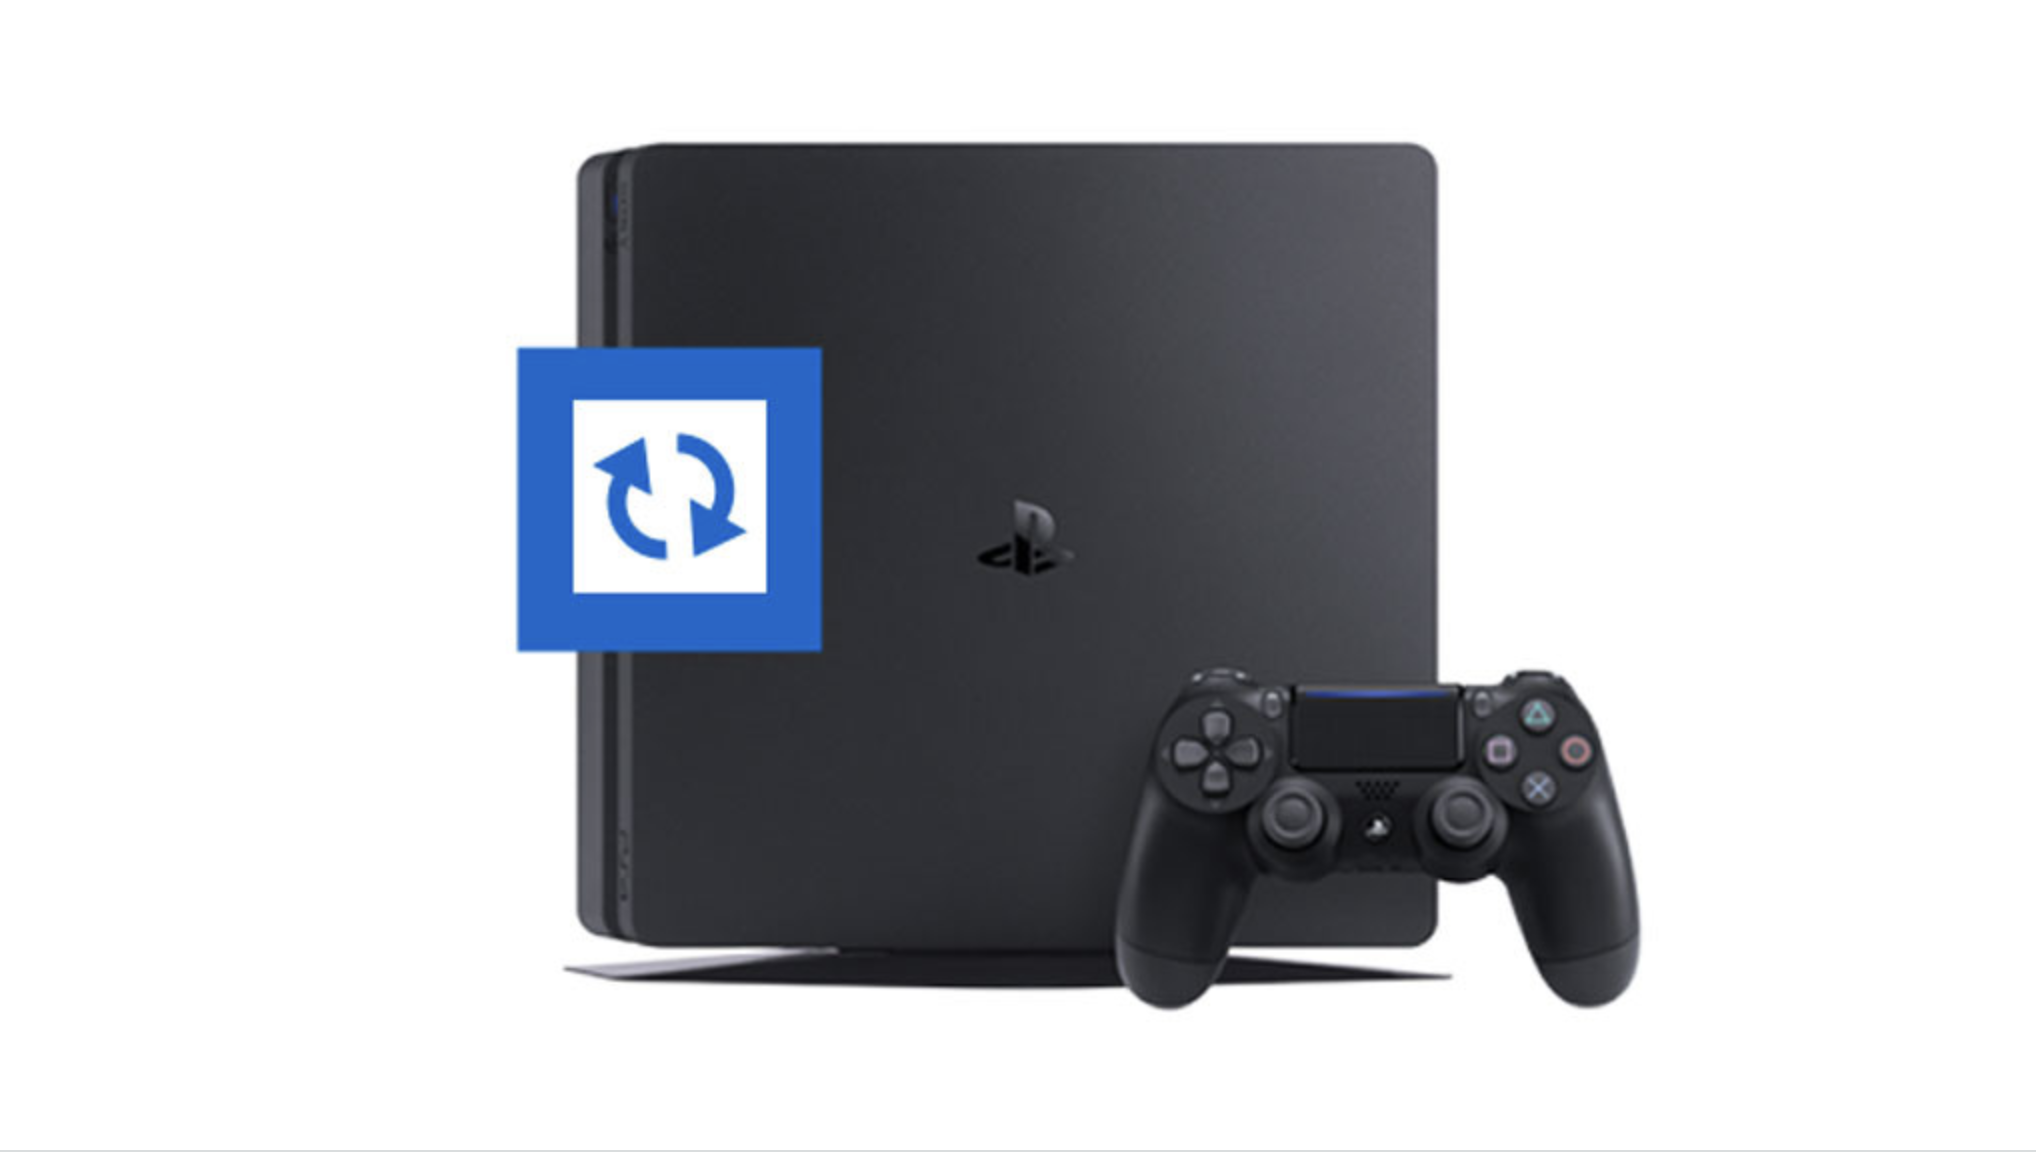 Плейстейшен 8. Ds50 ps4. Ps4 Pro Firmware. Ps4 Pro 9.00.